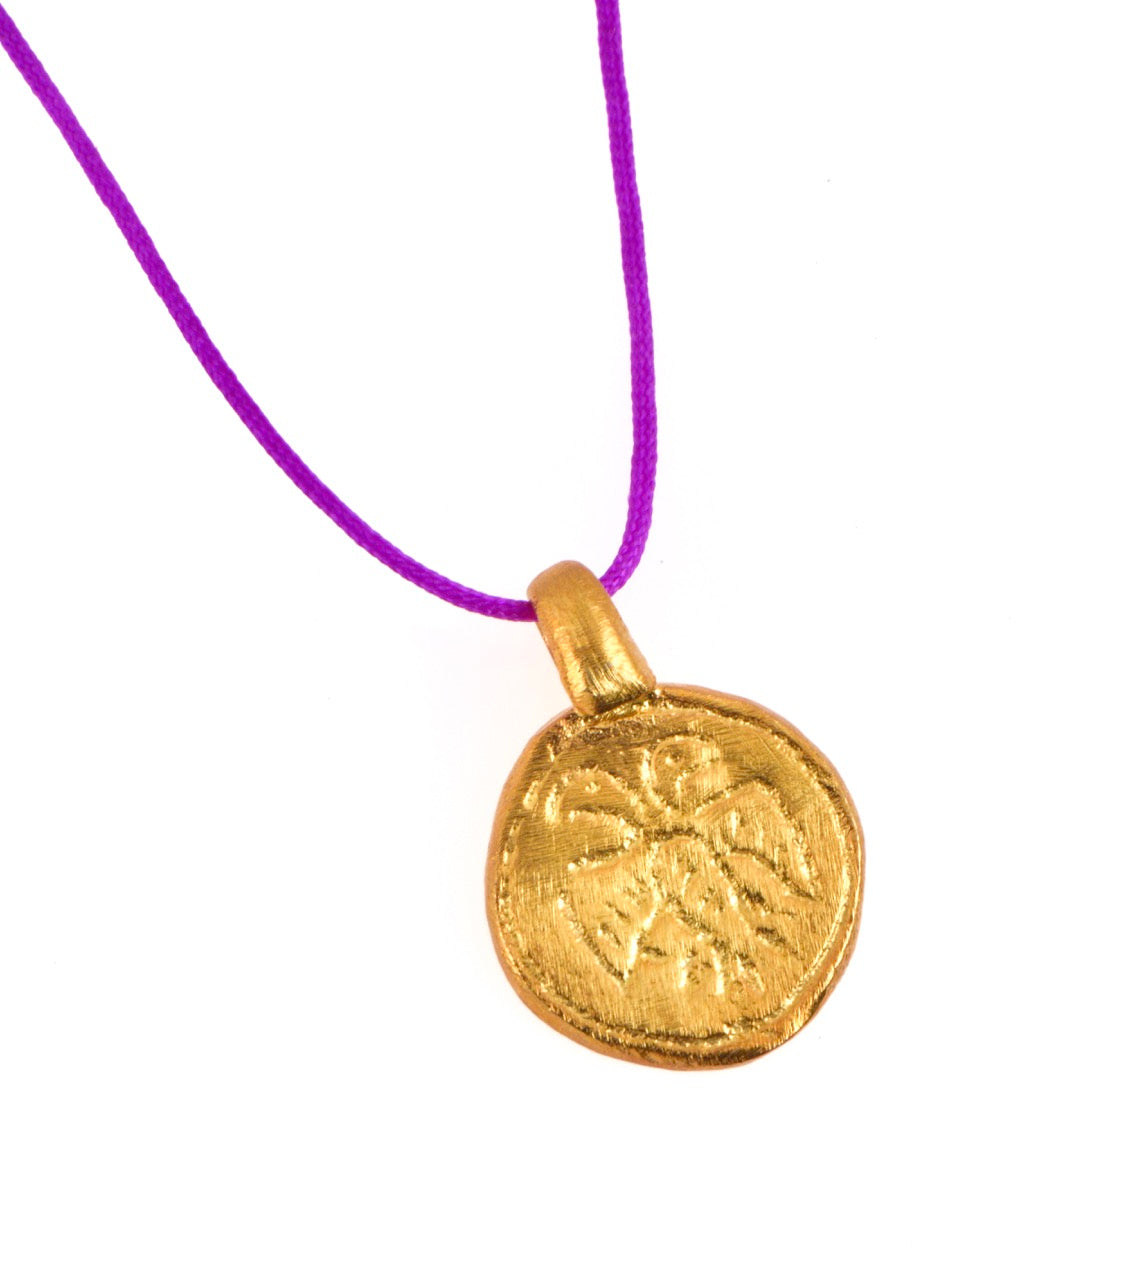 Palaiologian State Coat of Arms Necklace